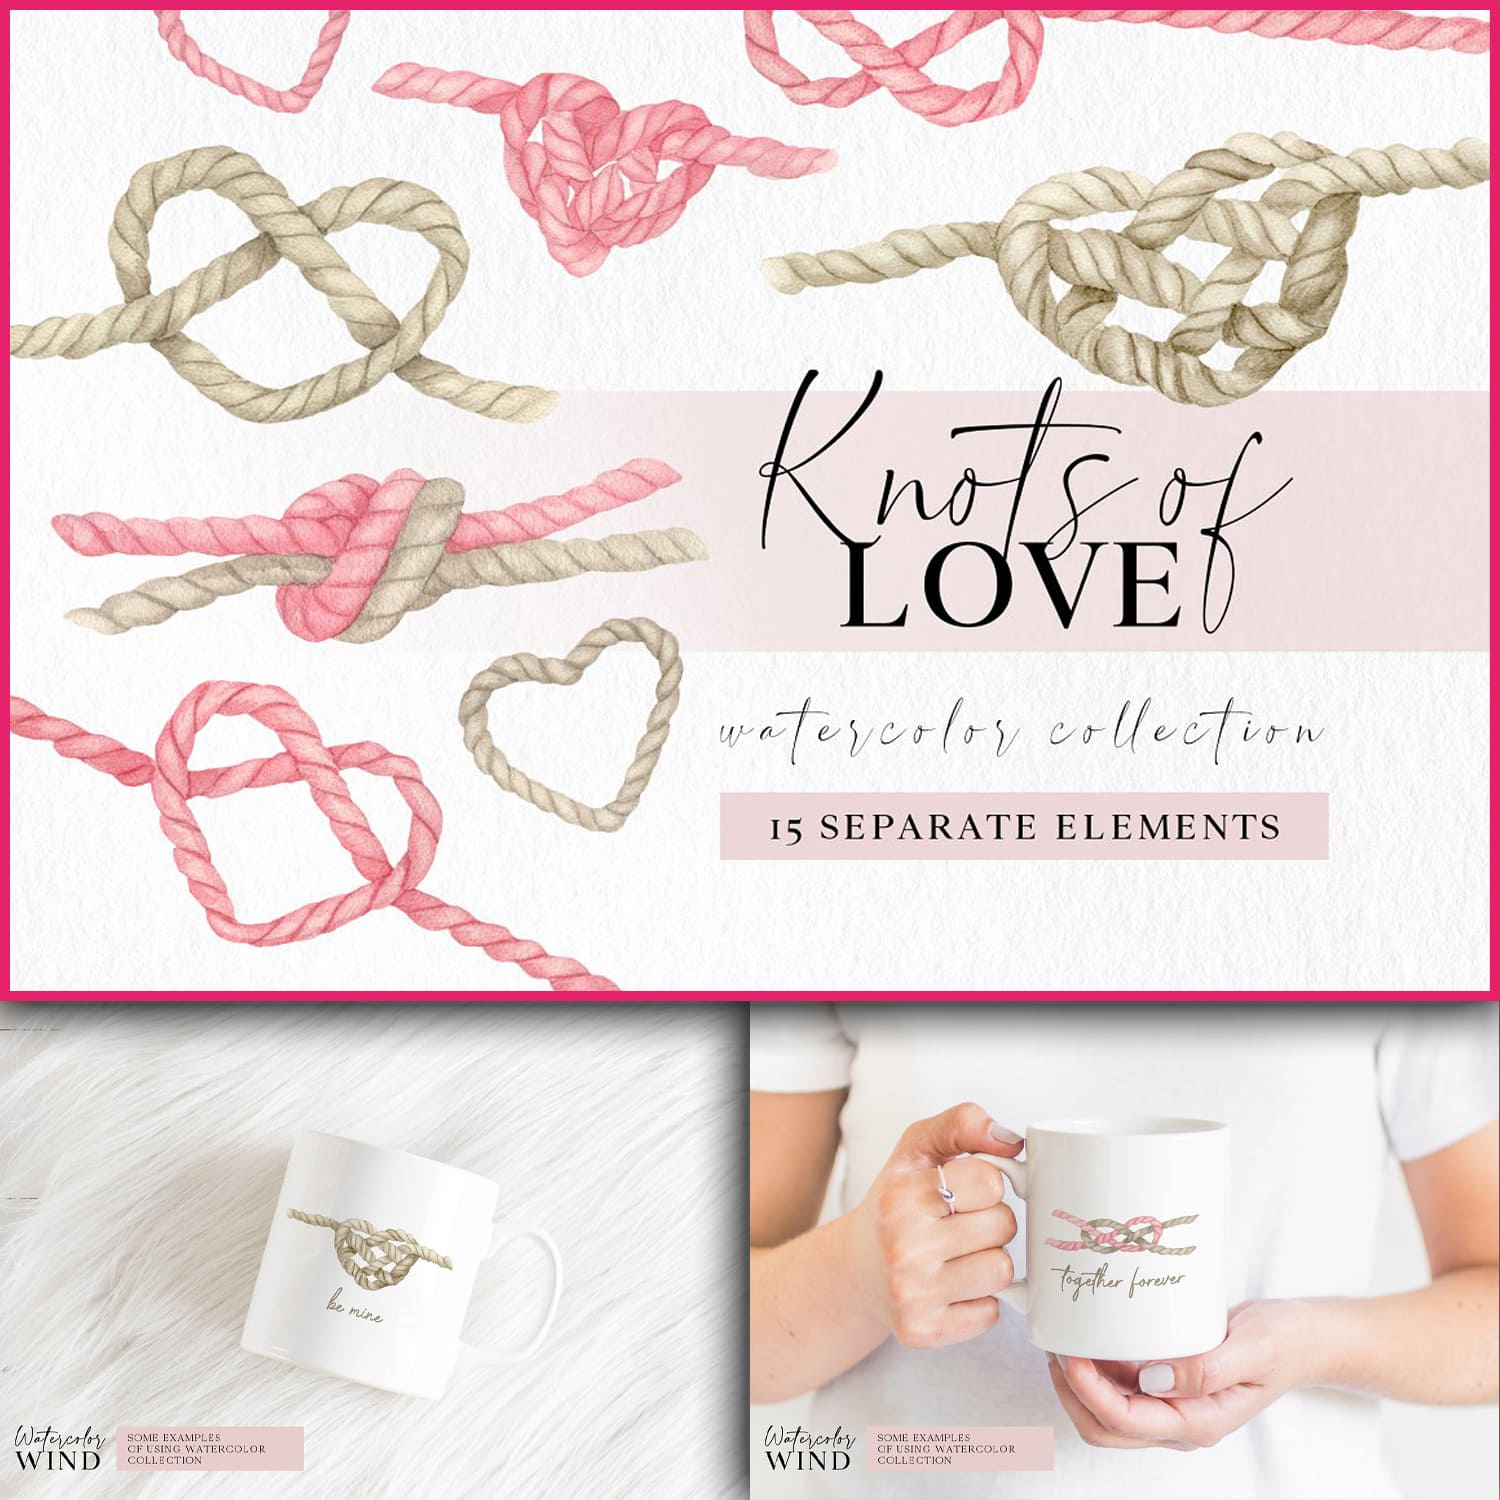 15 separate elements of knots of love watercolor collection.